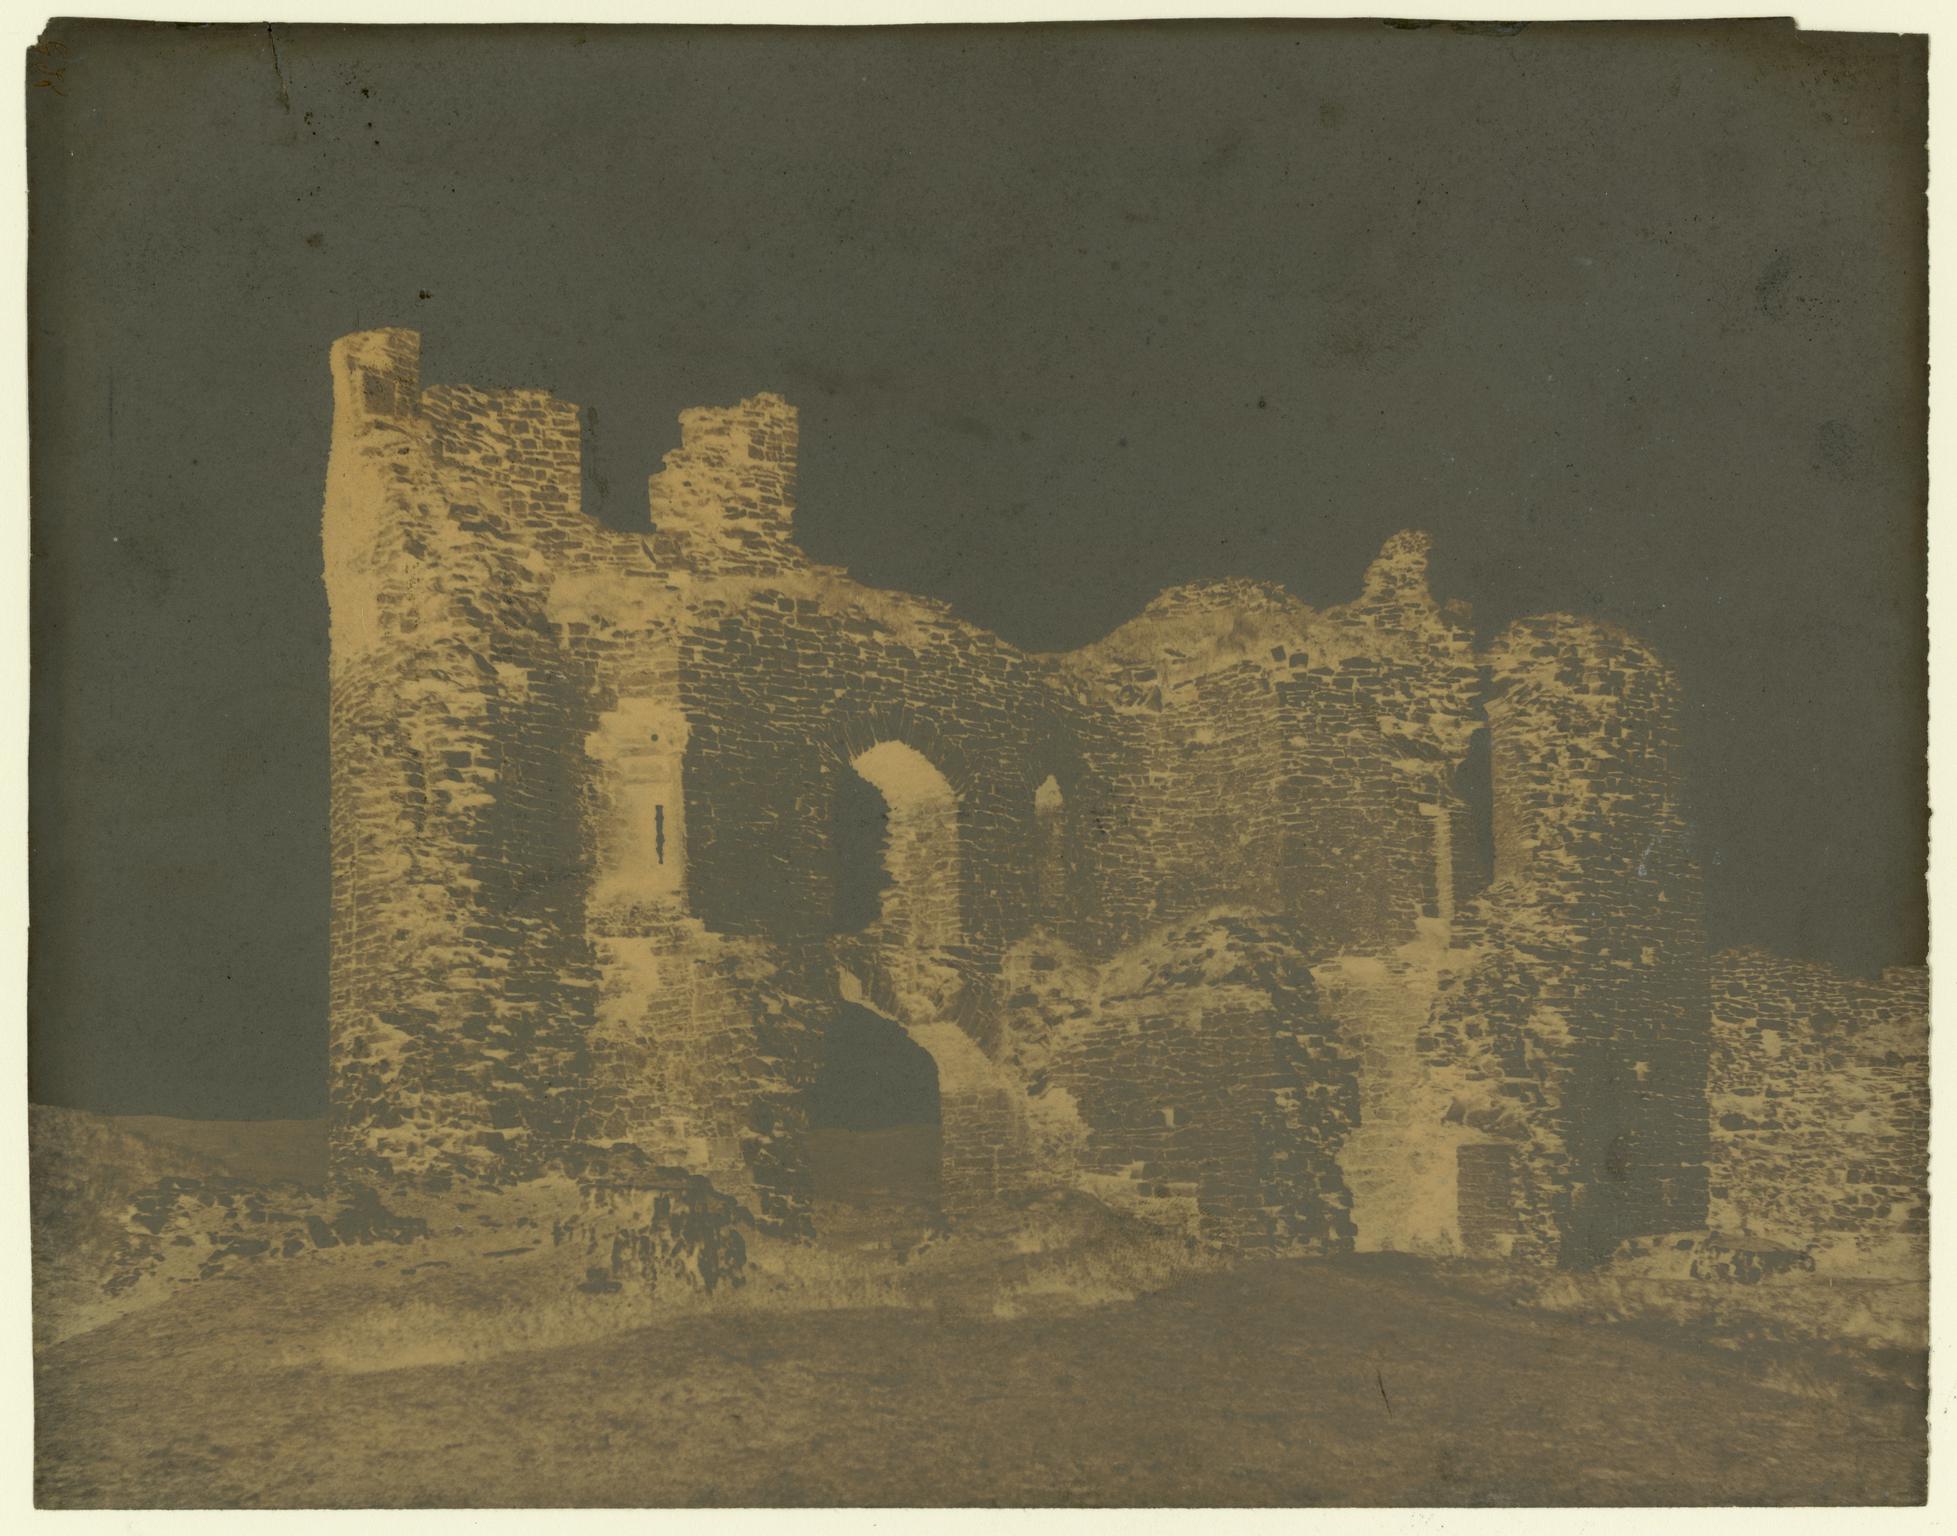 Pennard Castle - From Interior Court